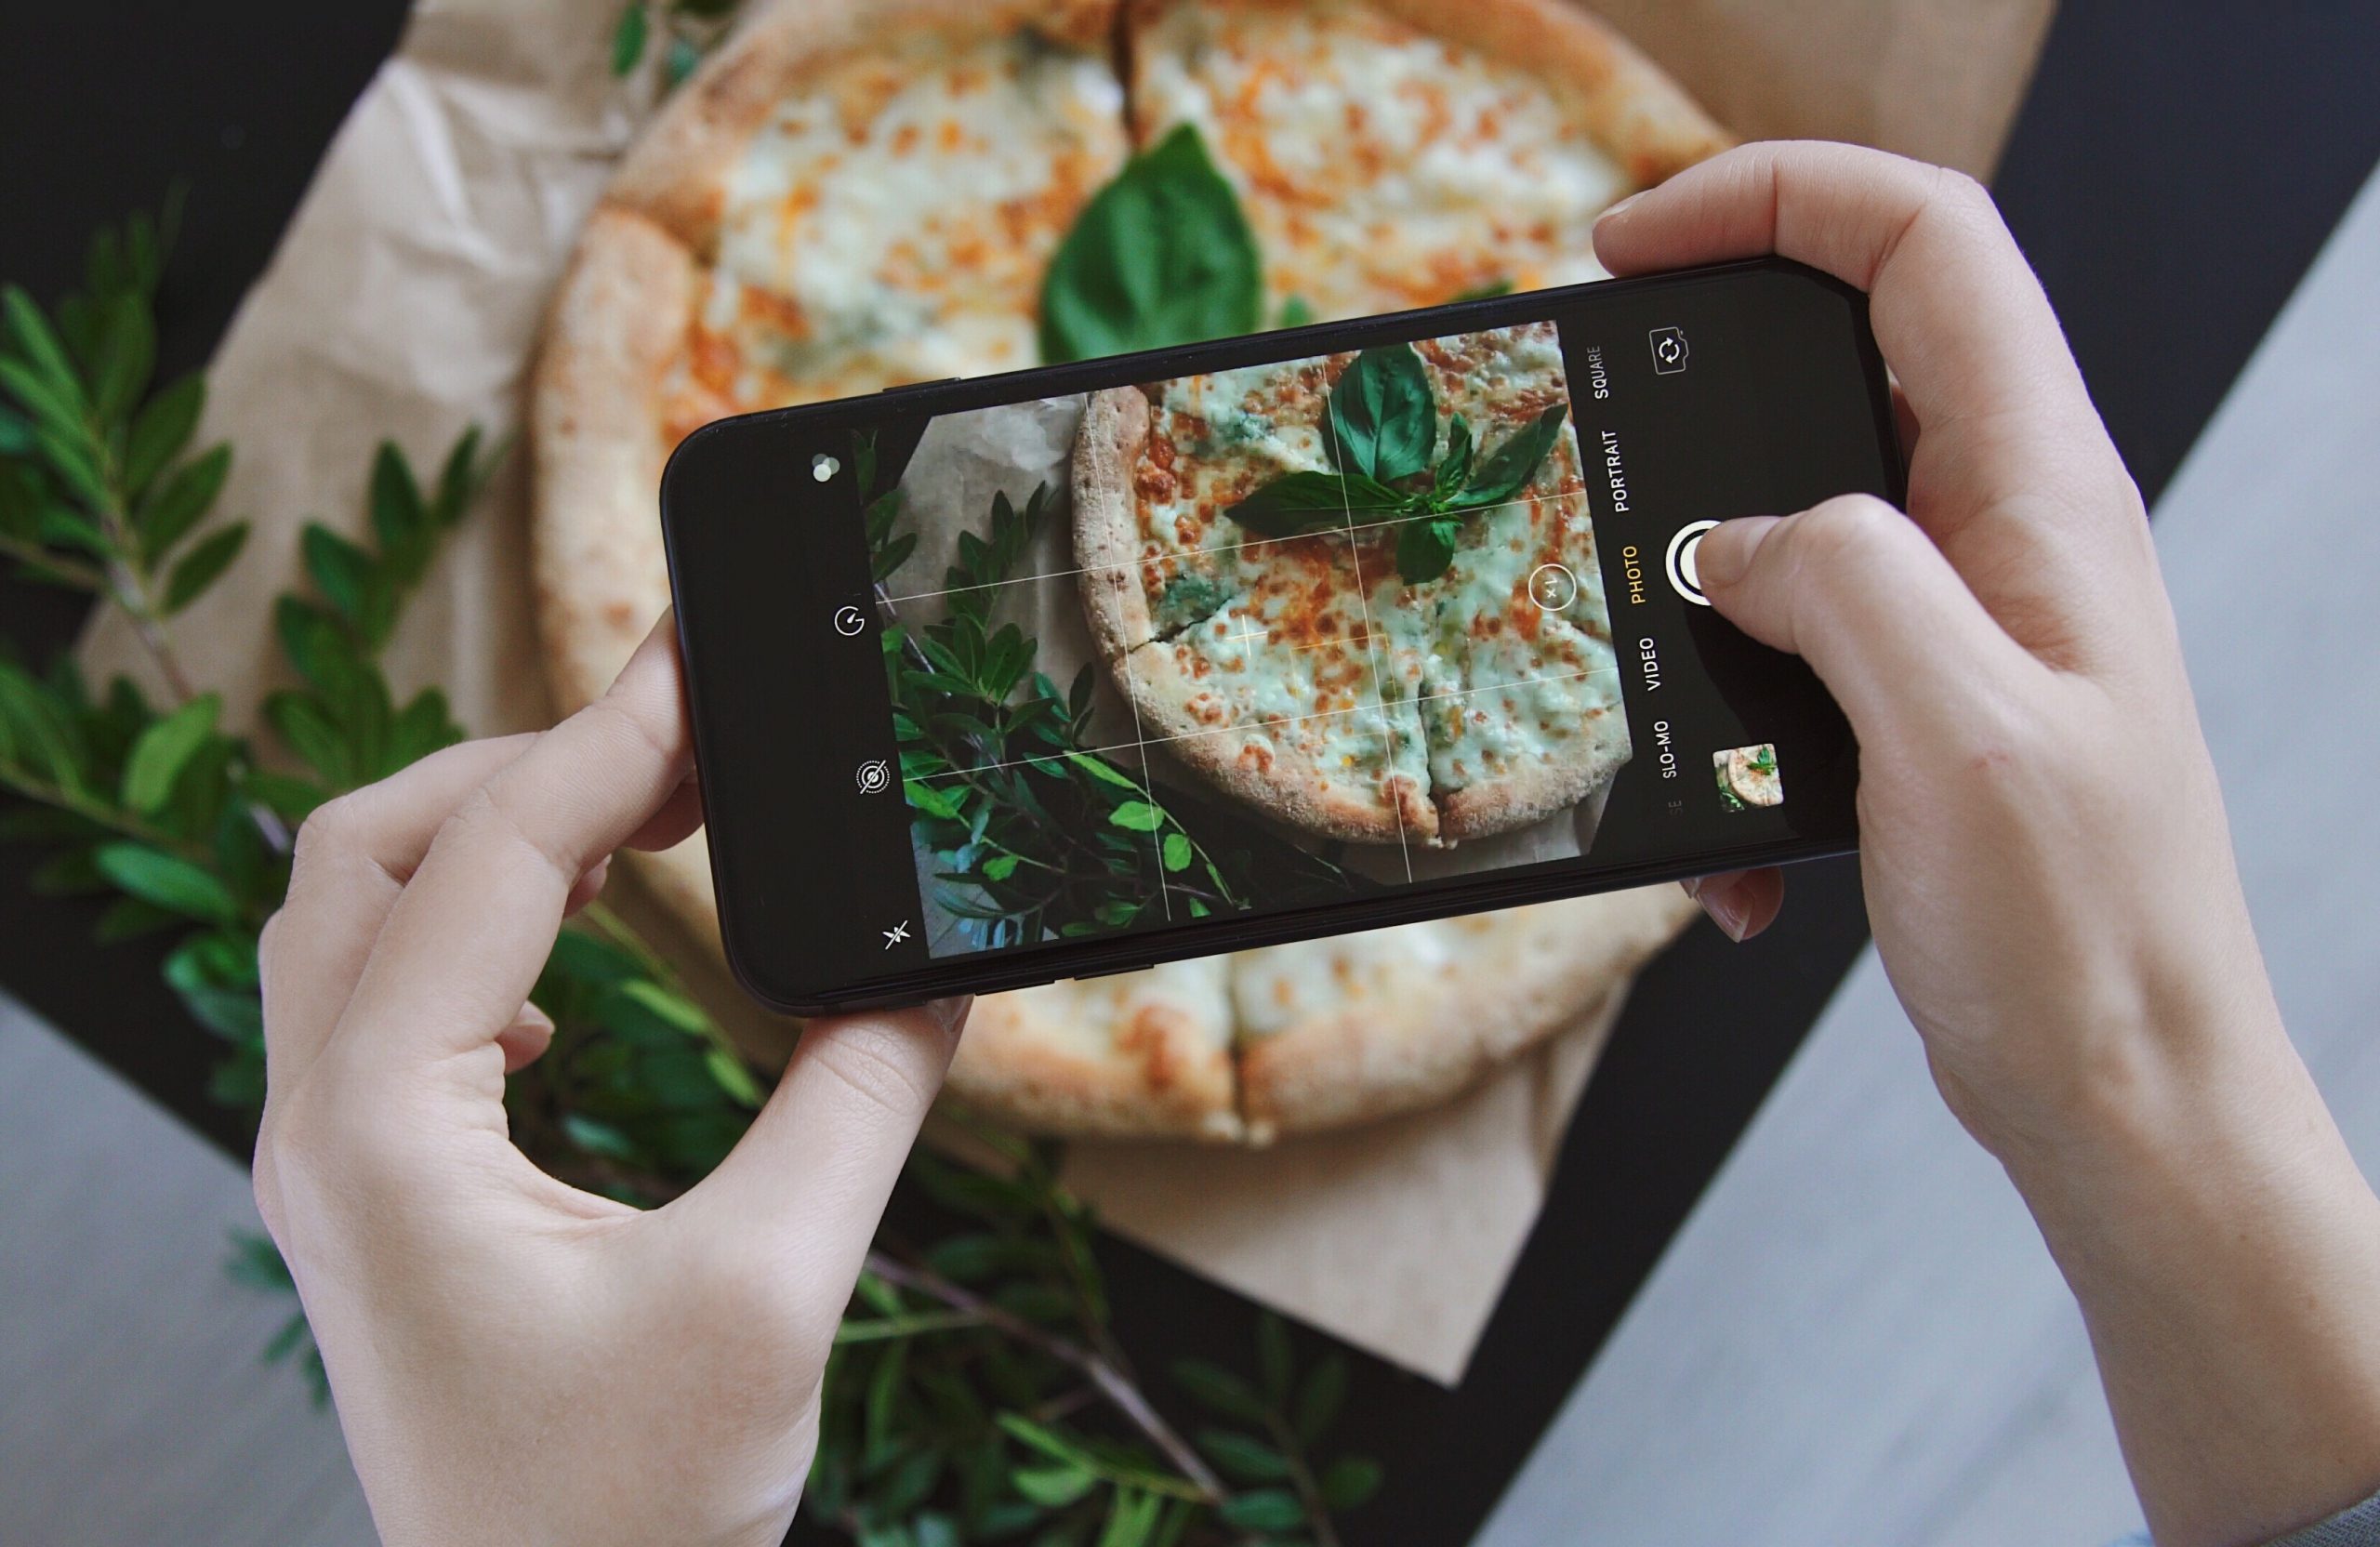 Taking food pictures on an iPhone